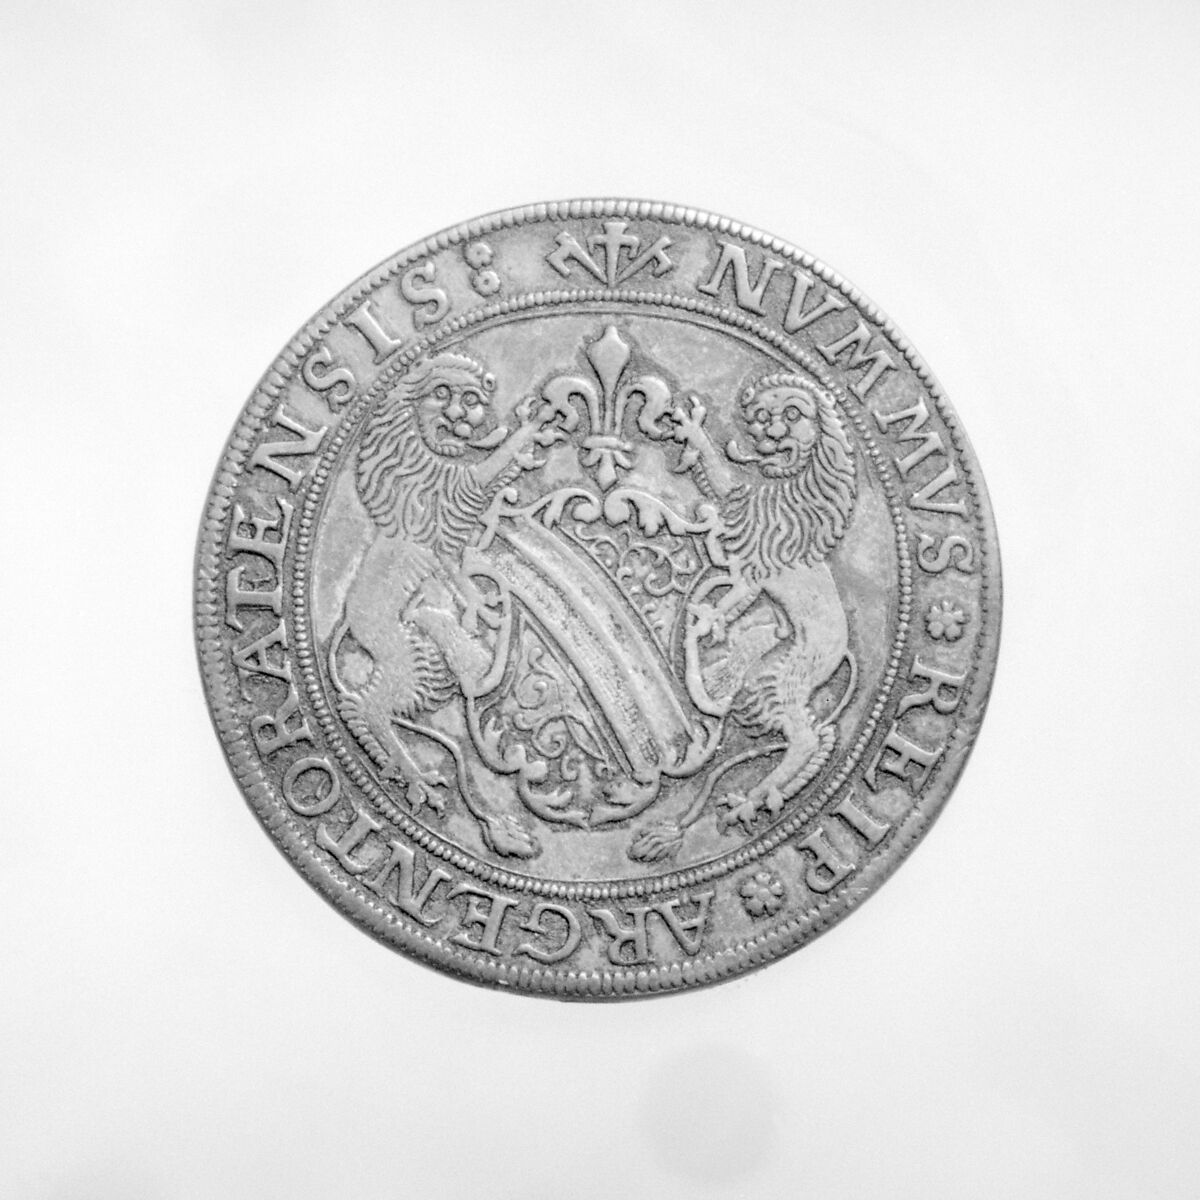 Lily-dollar ("Lilienthaler") of the Imperial Free-City of Strasbourg, Silver, German 